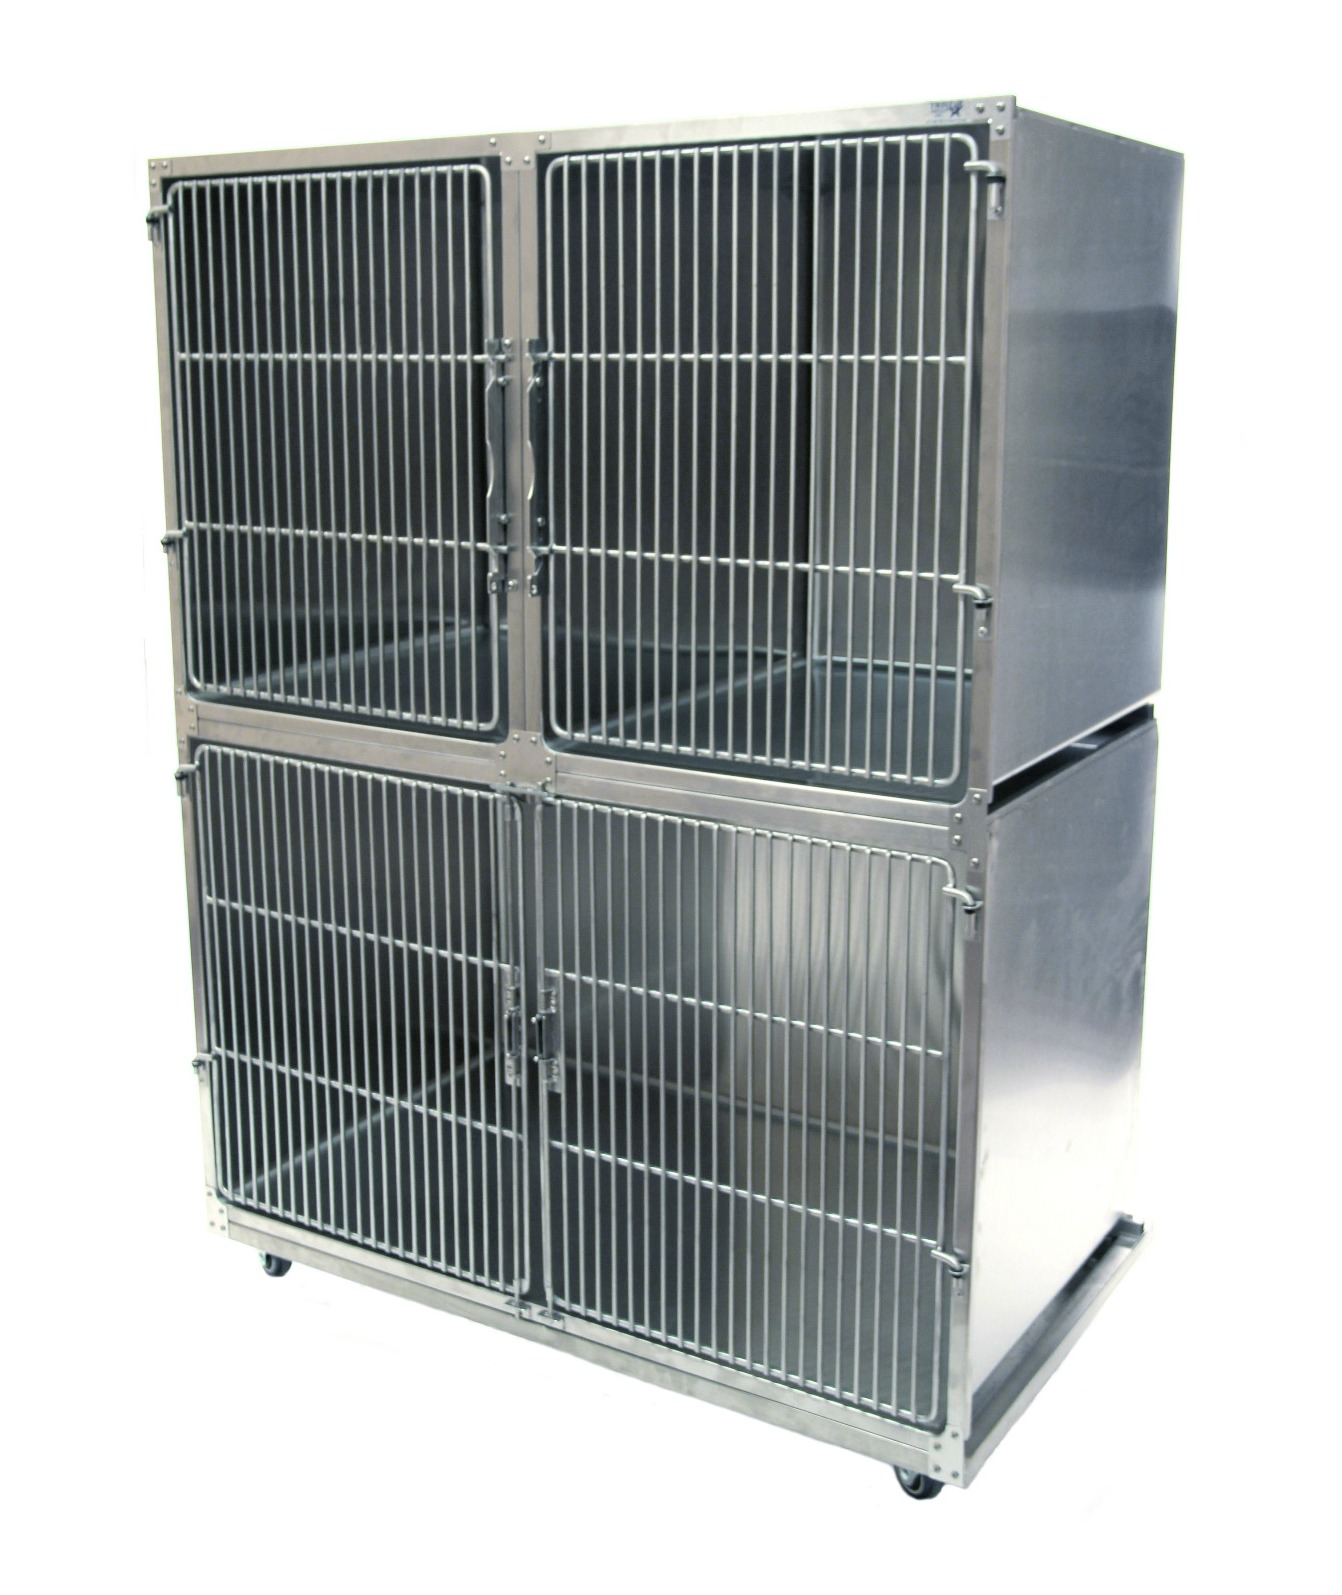 Kennels Direct Dog Crates - Gray - S